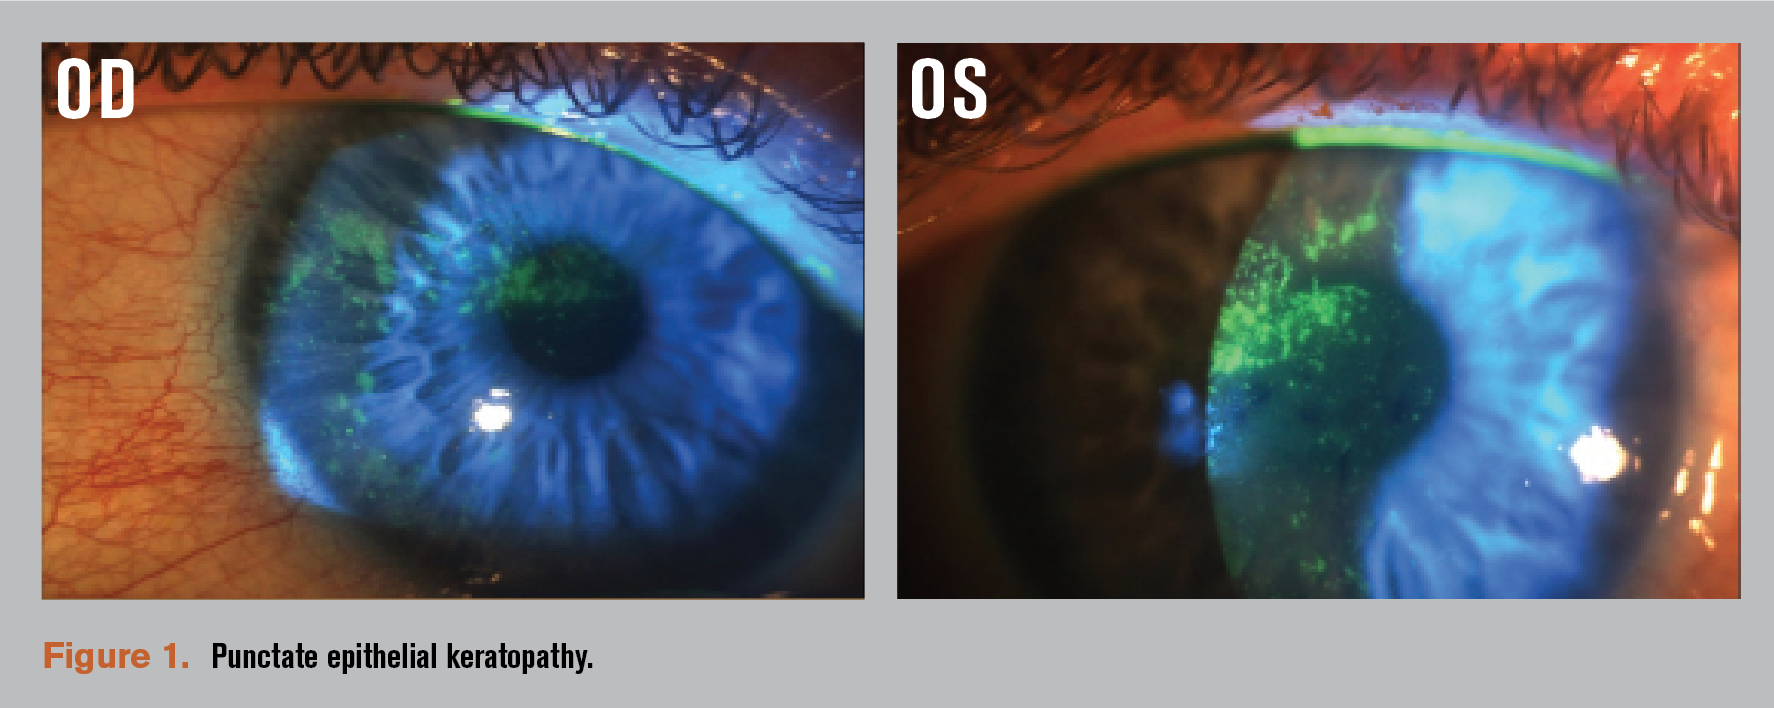 Case review of challenging ocular surface disease